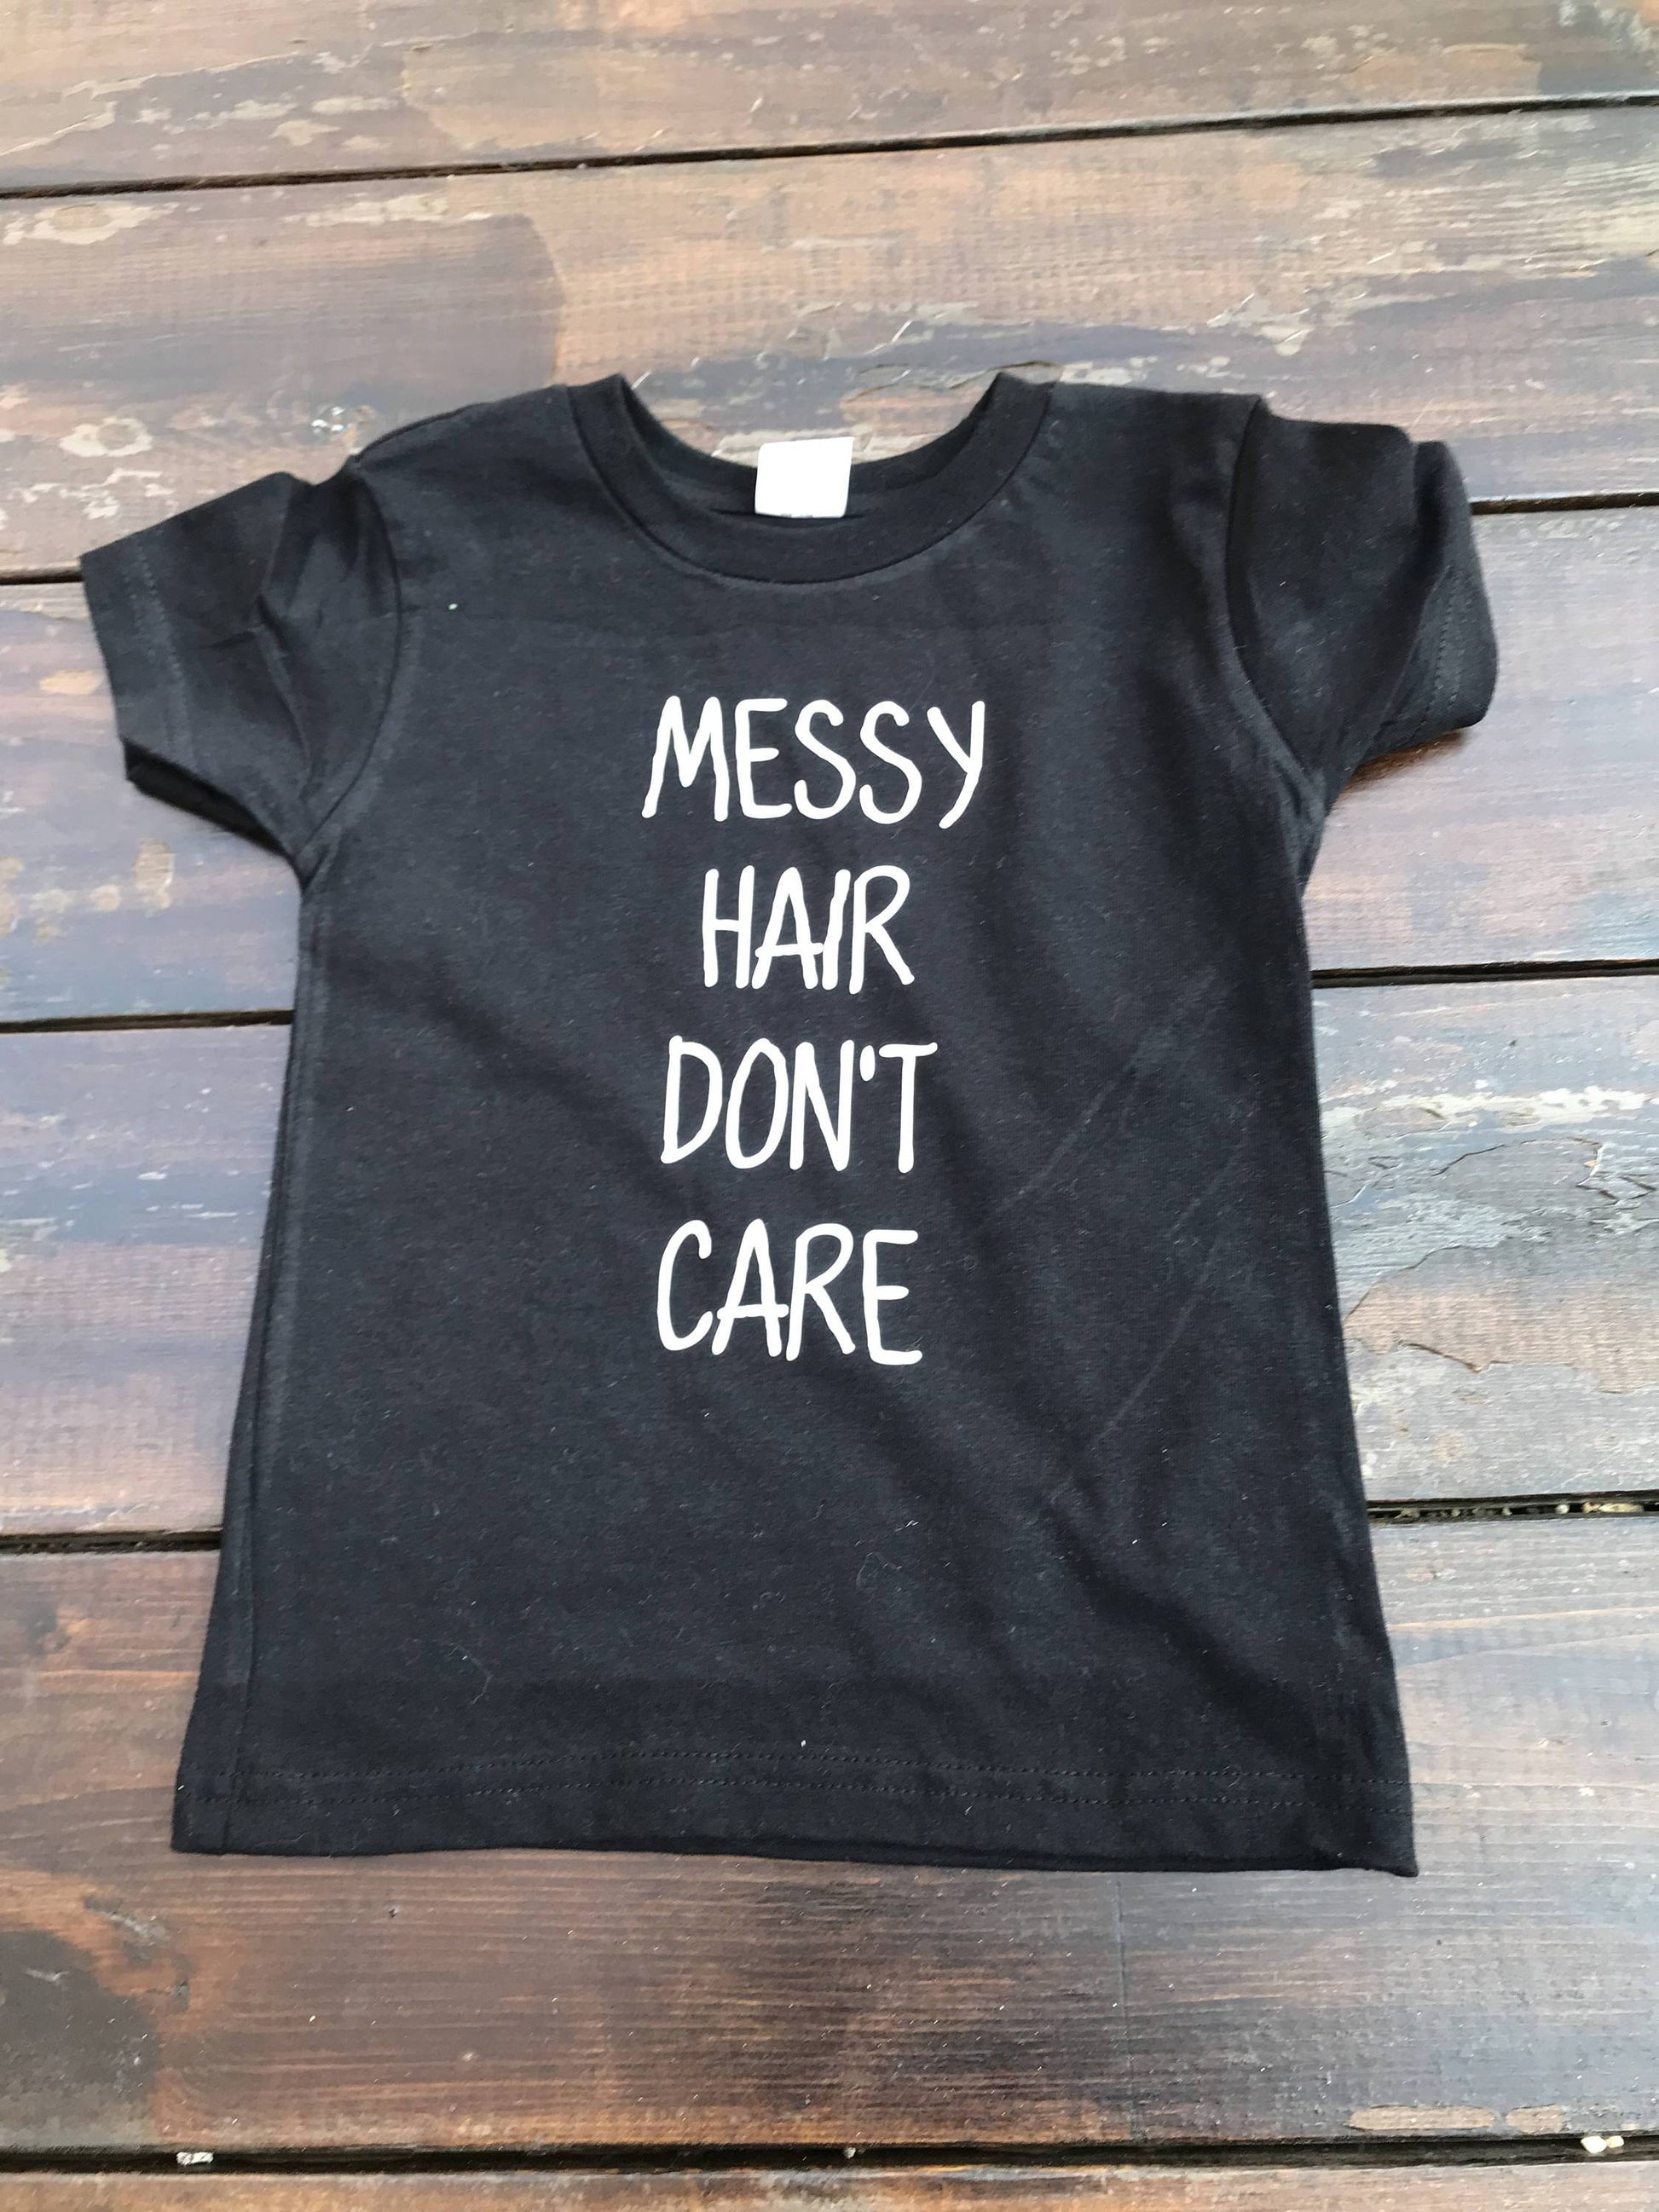 Handcrafted Children's Clothing, Clothing for Children and Parents, Messy Hair Don't Care, chi-fashionista